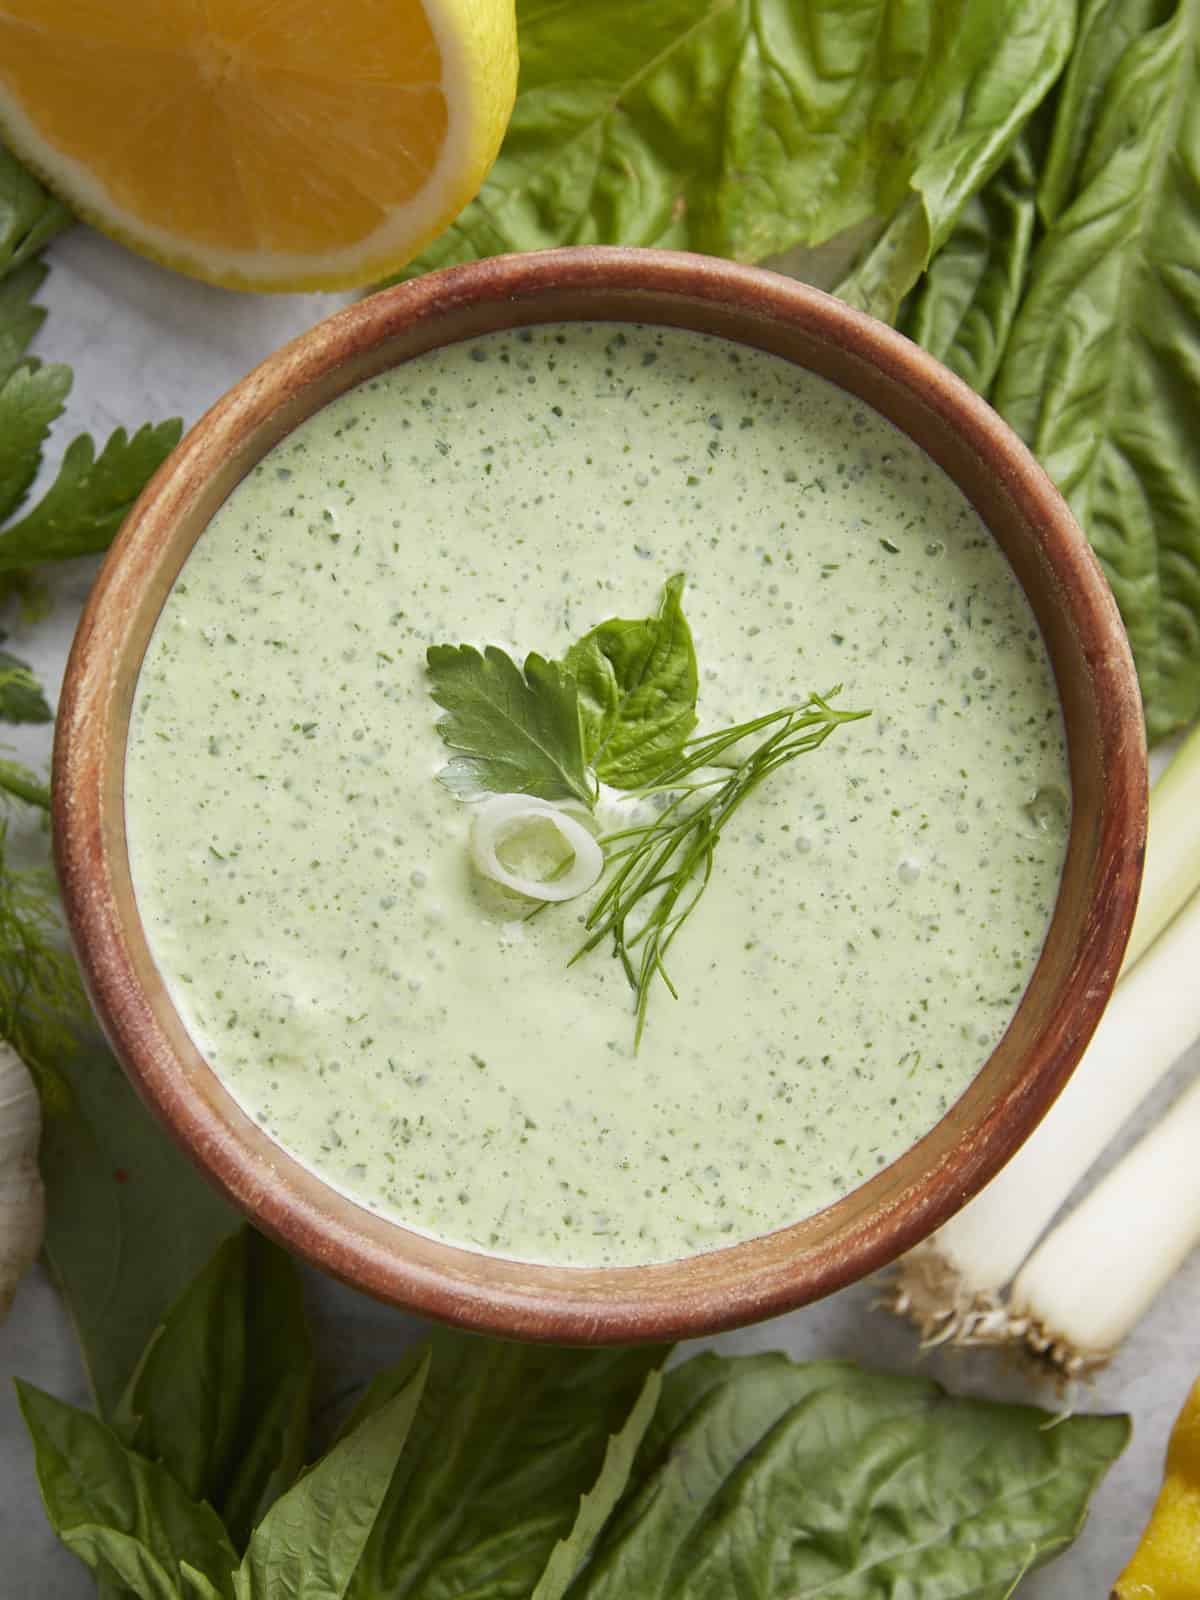 Overhead shot of Green Goddess Dressing in a wood bowl garnished with herbs.